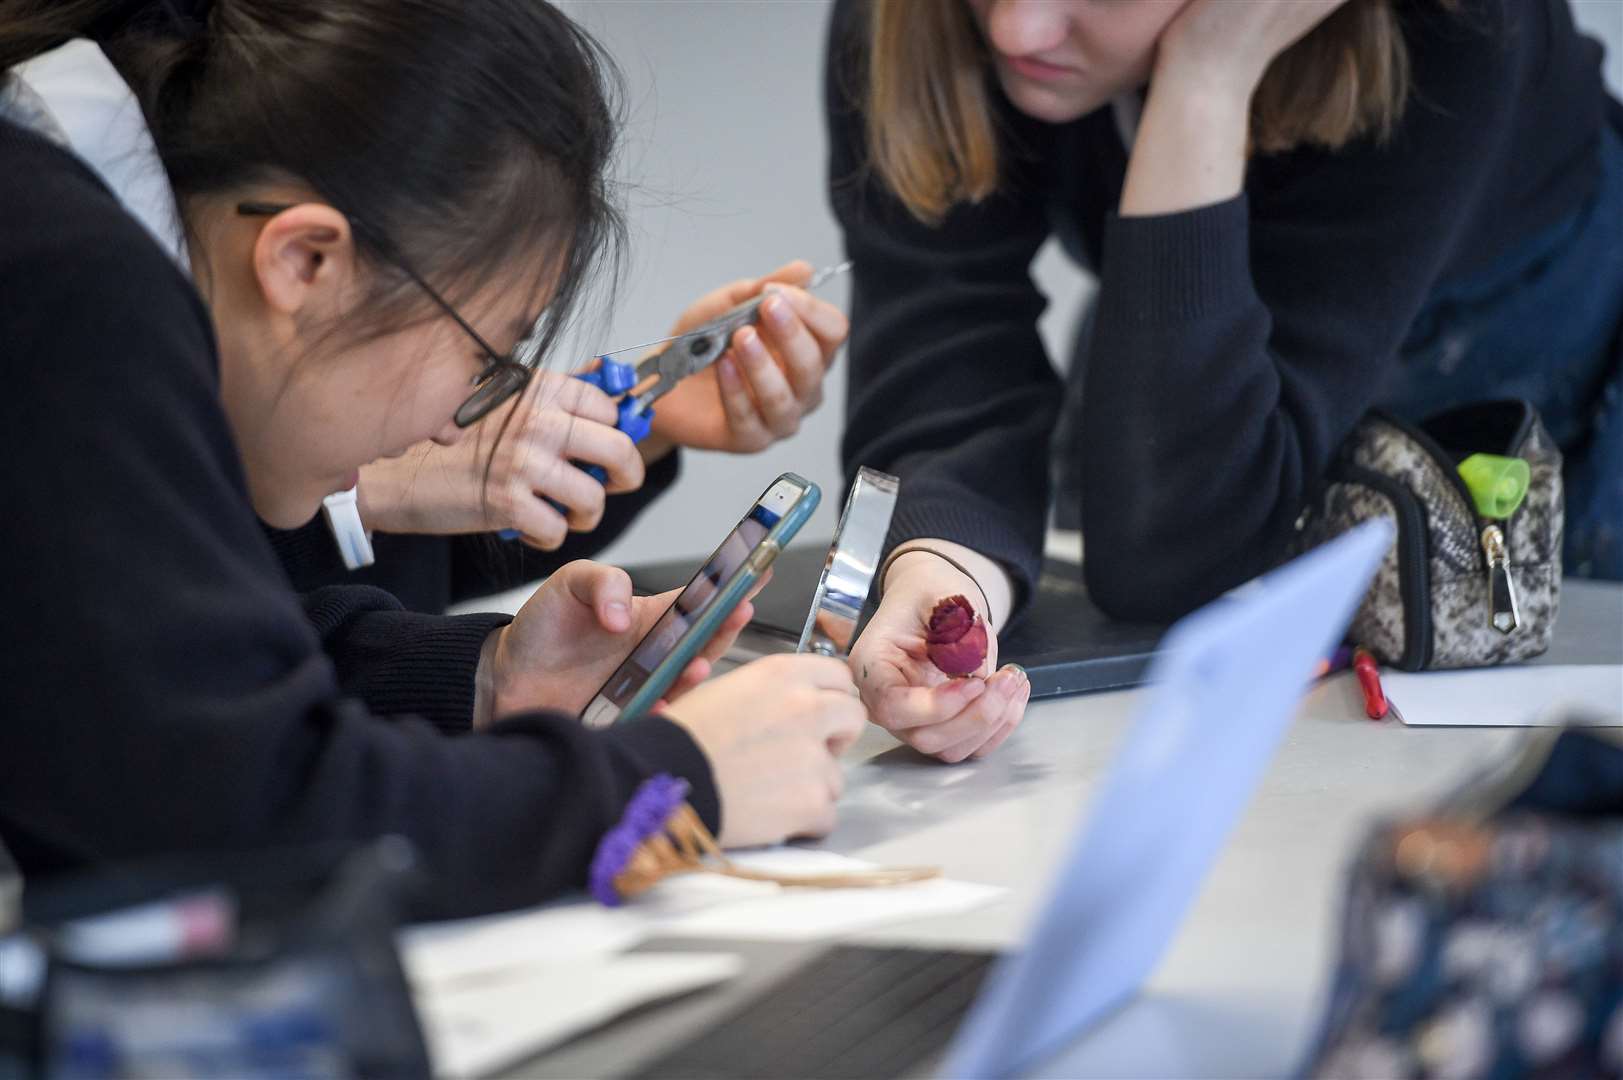 A pupil uses a mobile phone in class (Ben Birchall/PA)